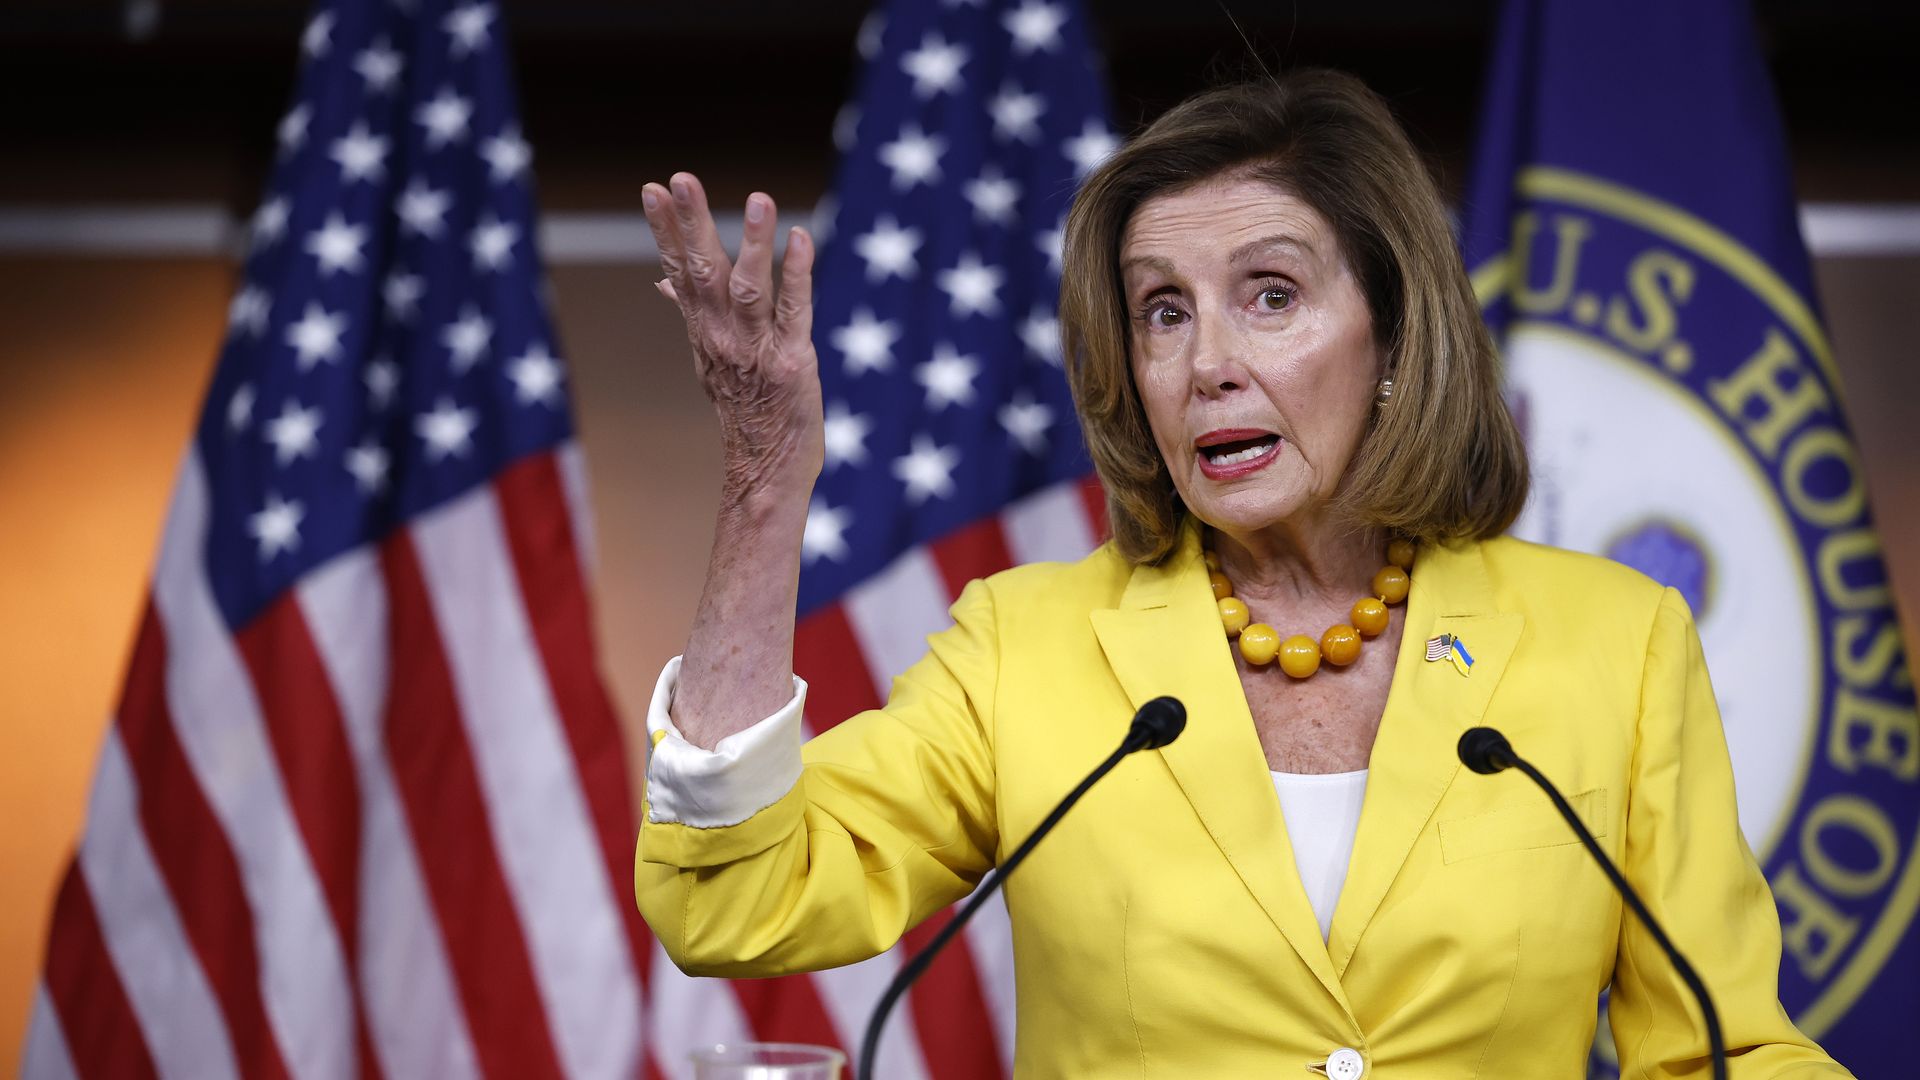 Nancy Pelosi in a yellow suit speaks in the House of Representatives